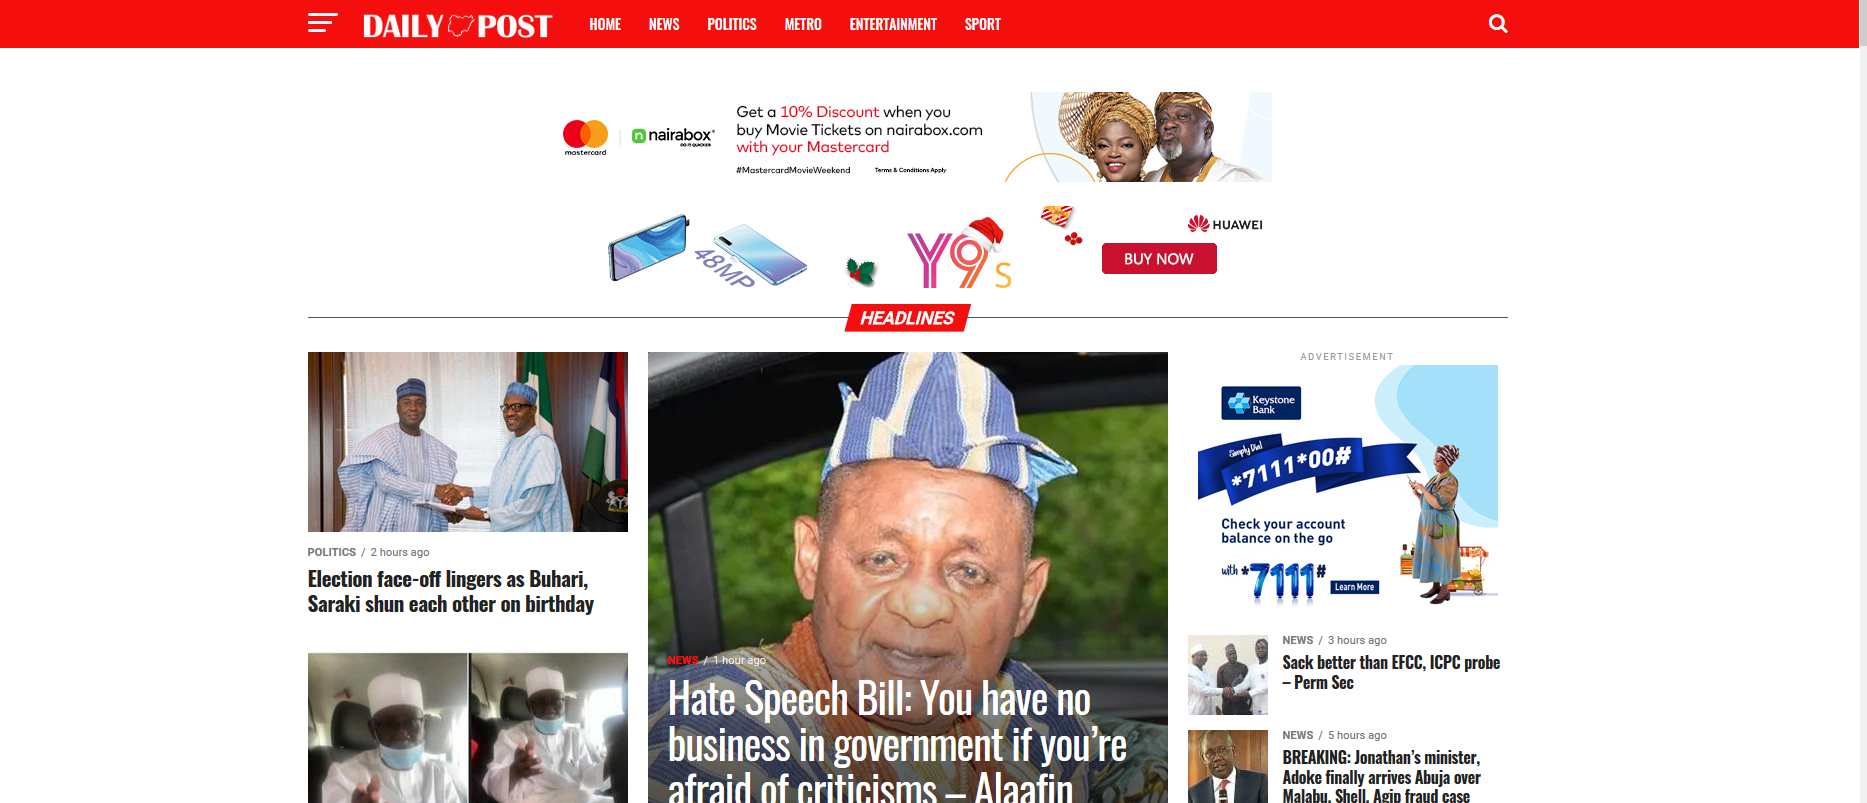 dailypost.ng is the second most visited news website in Nigeria 2021 